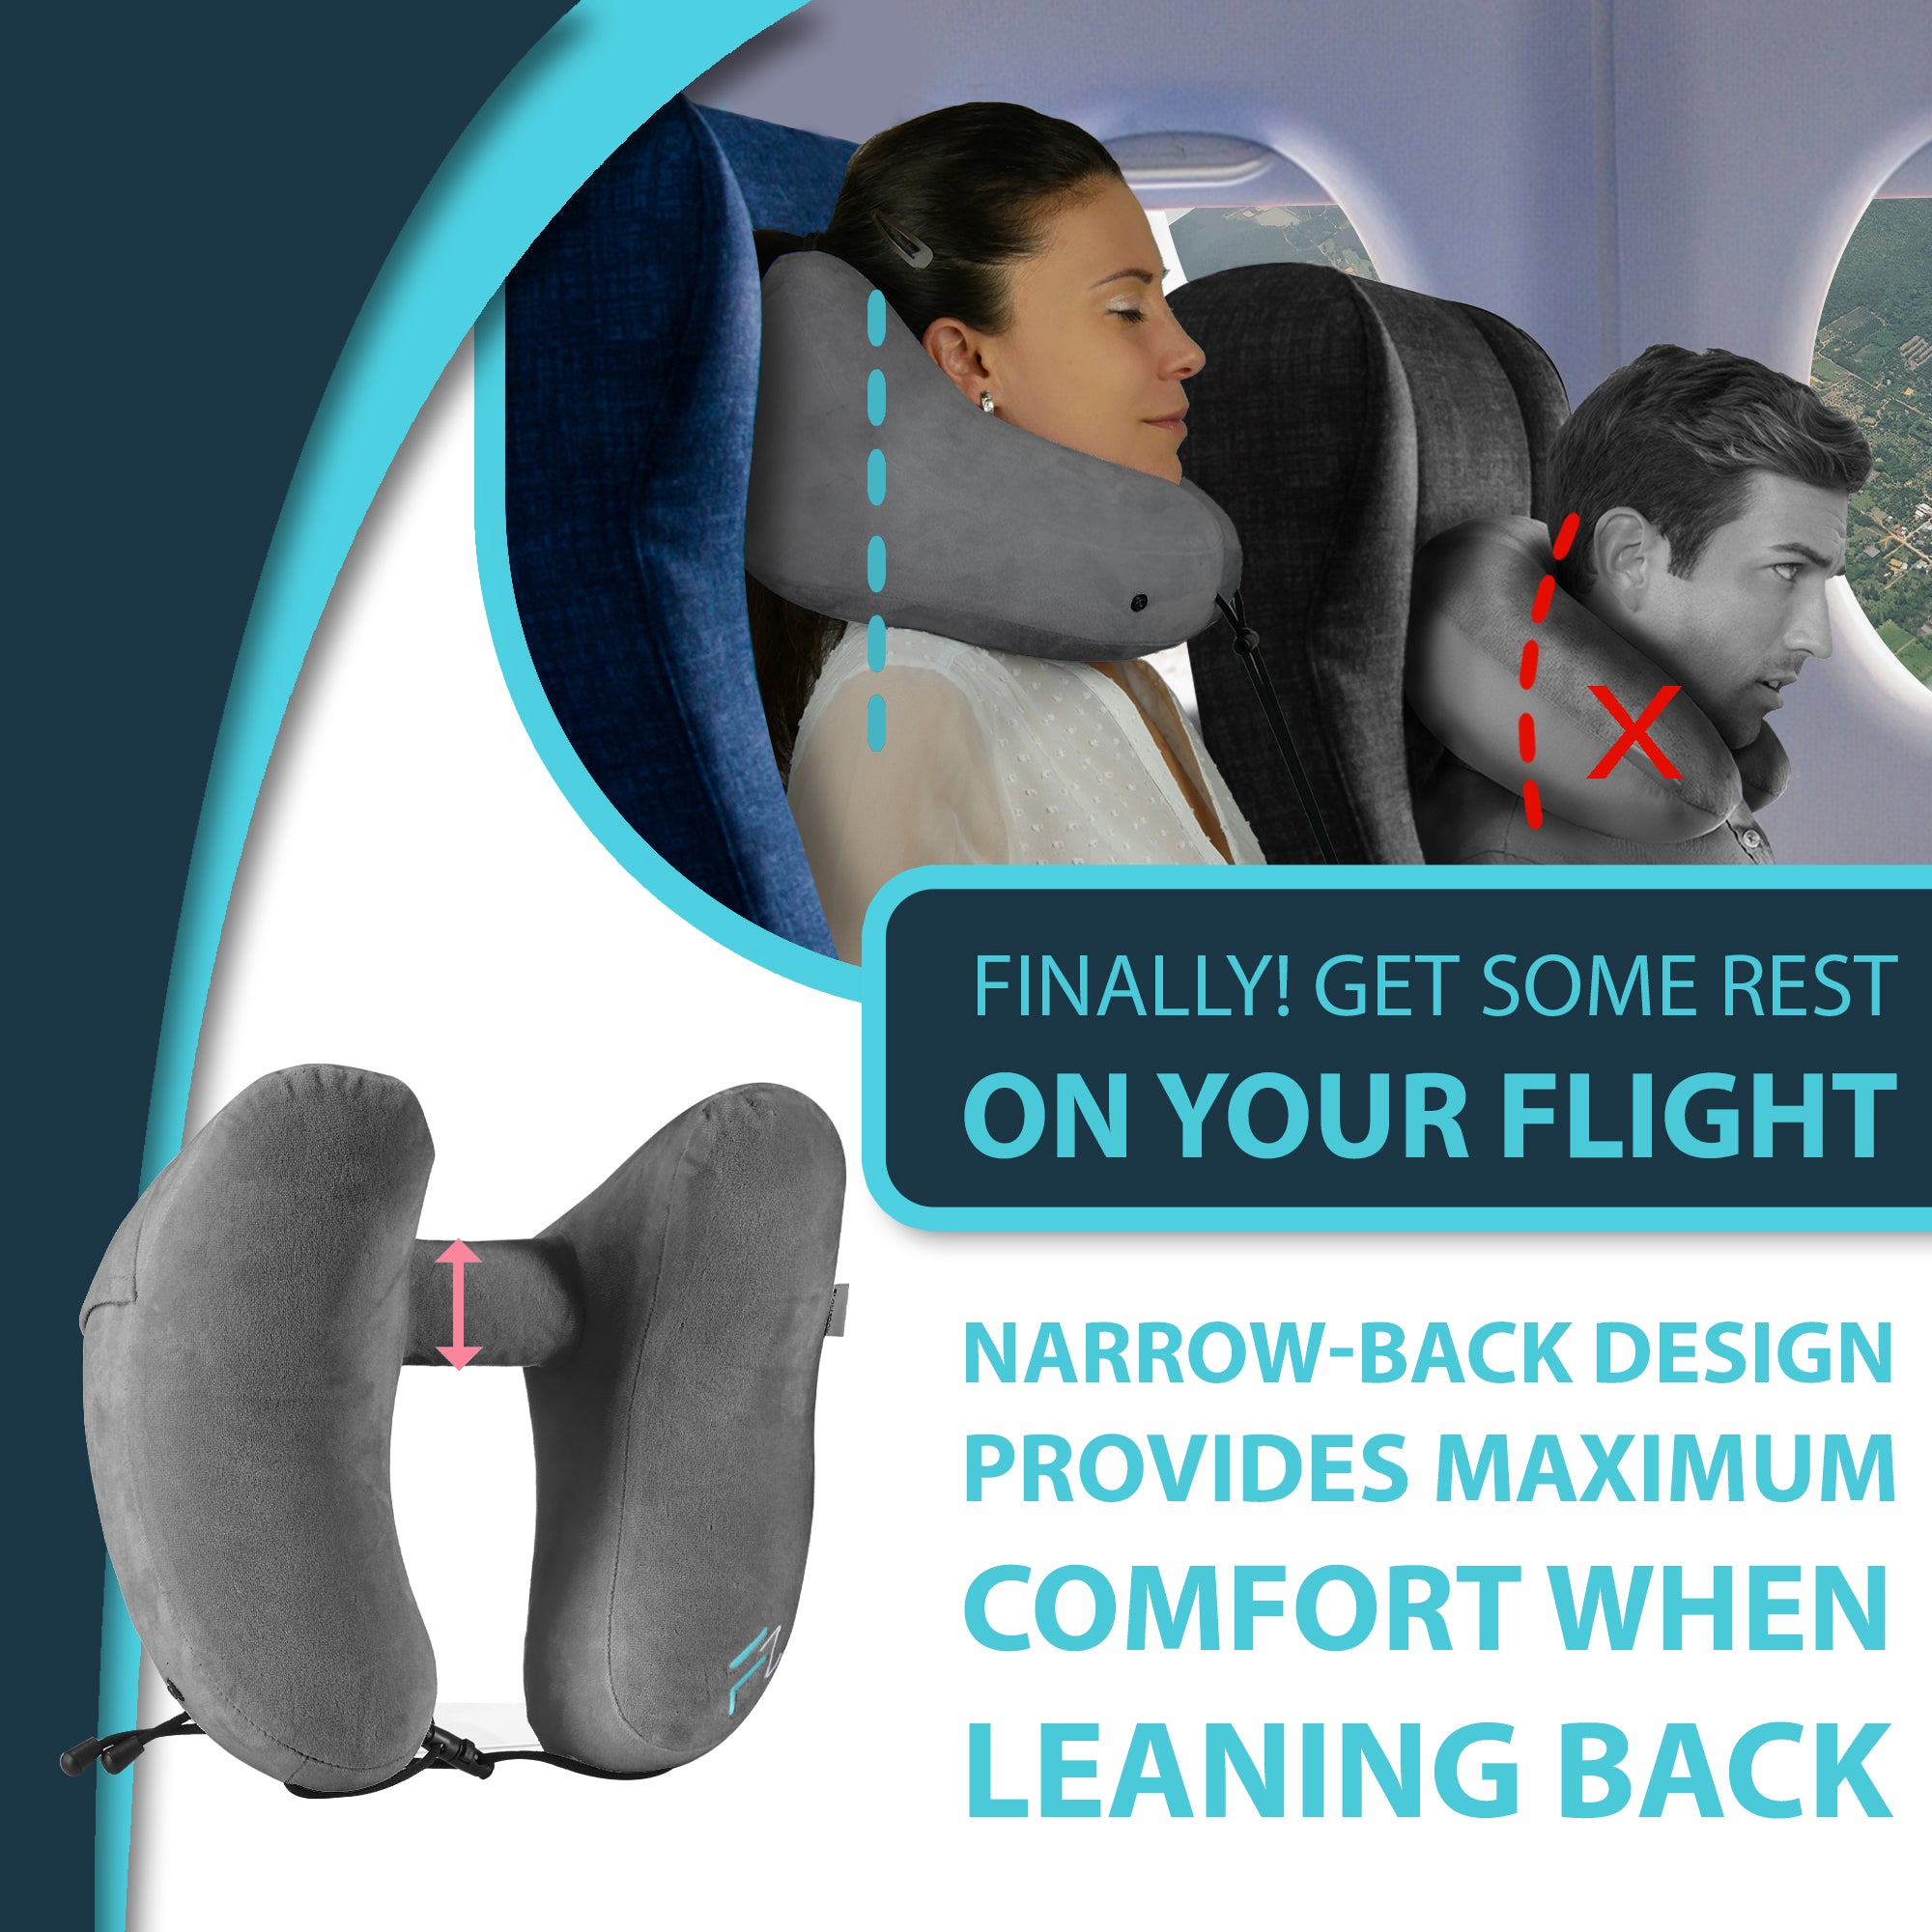 Neck Pillow for travelling with narrow back design 